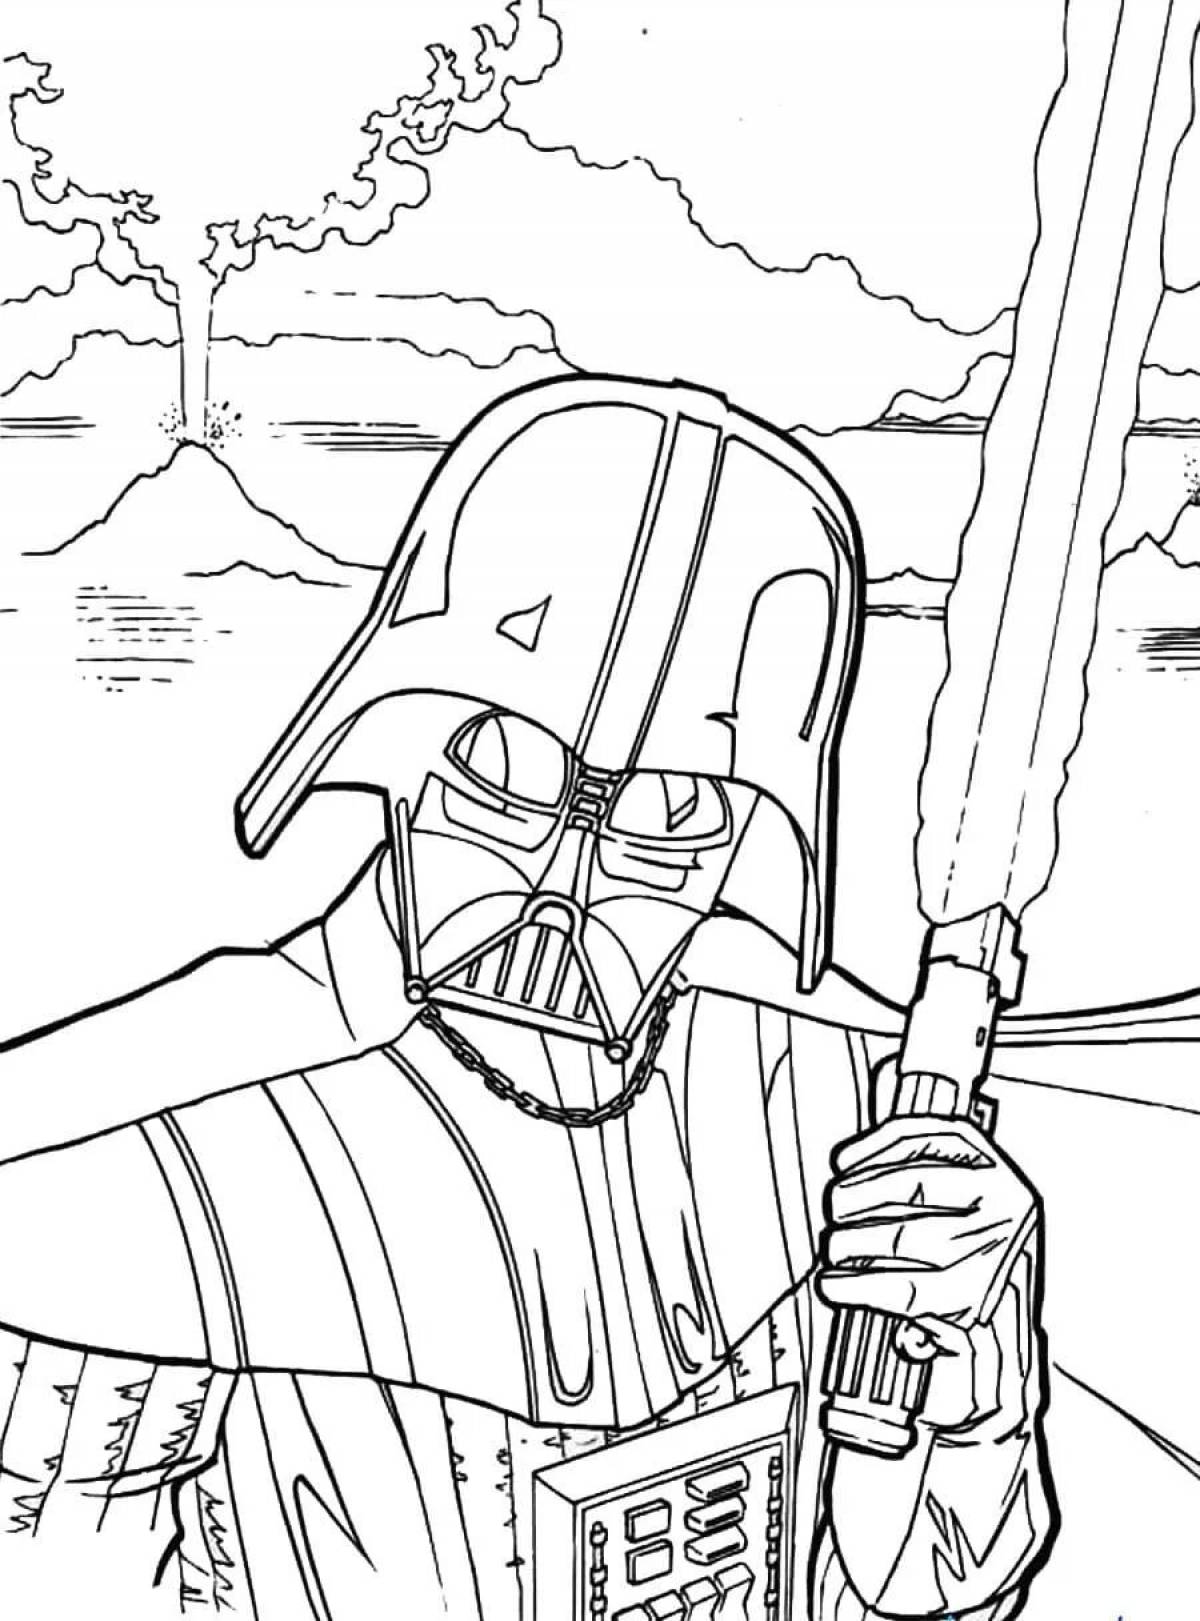 Brilliantly shaded star wars coloring page